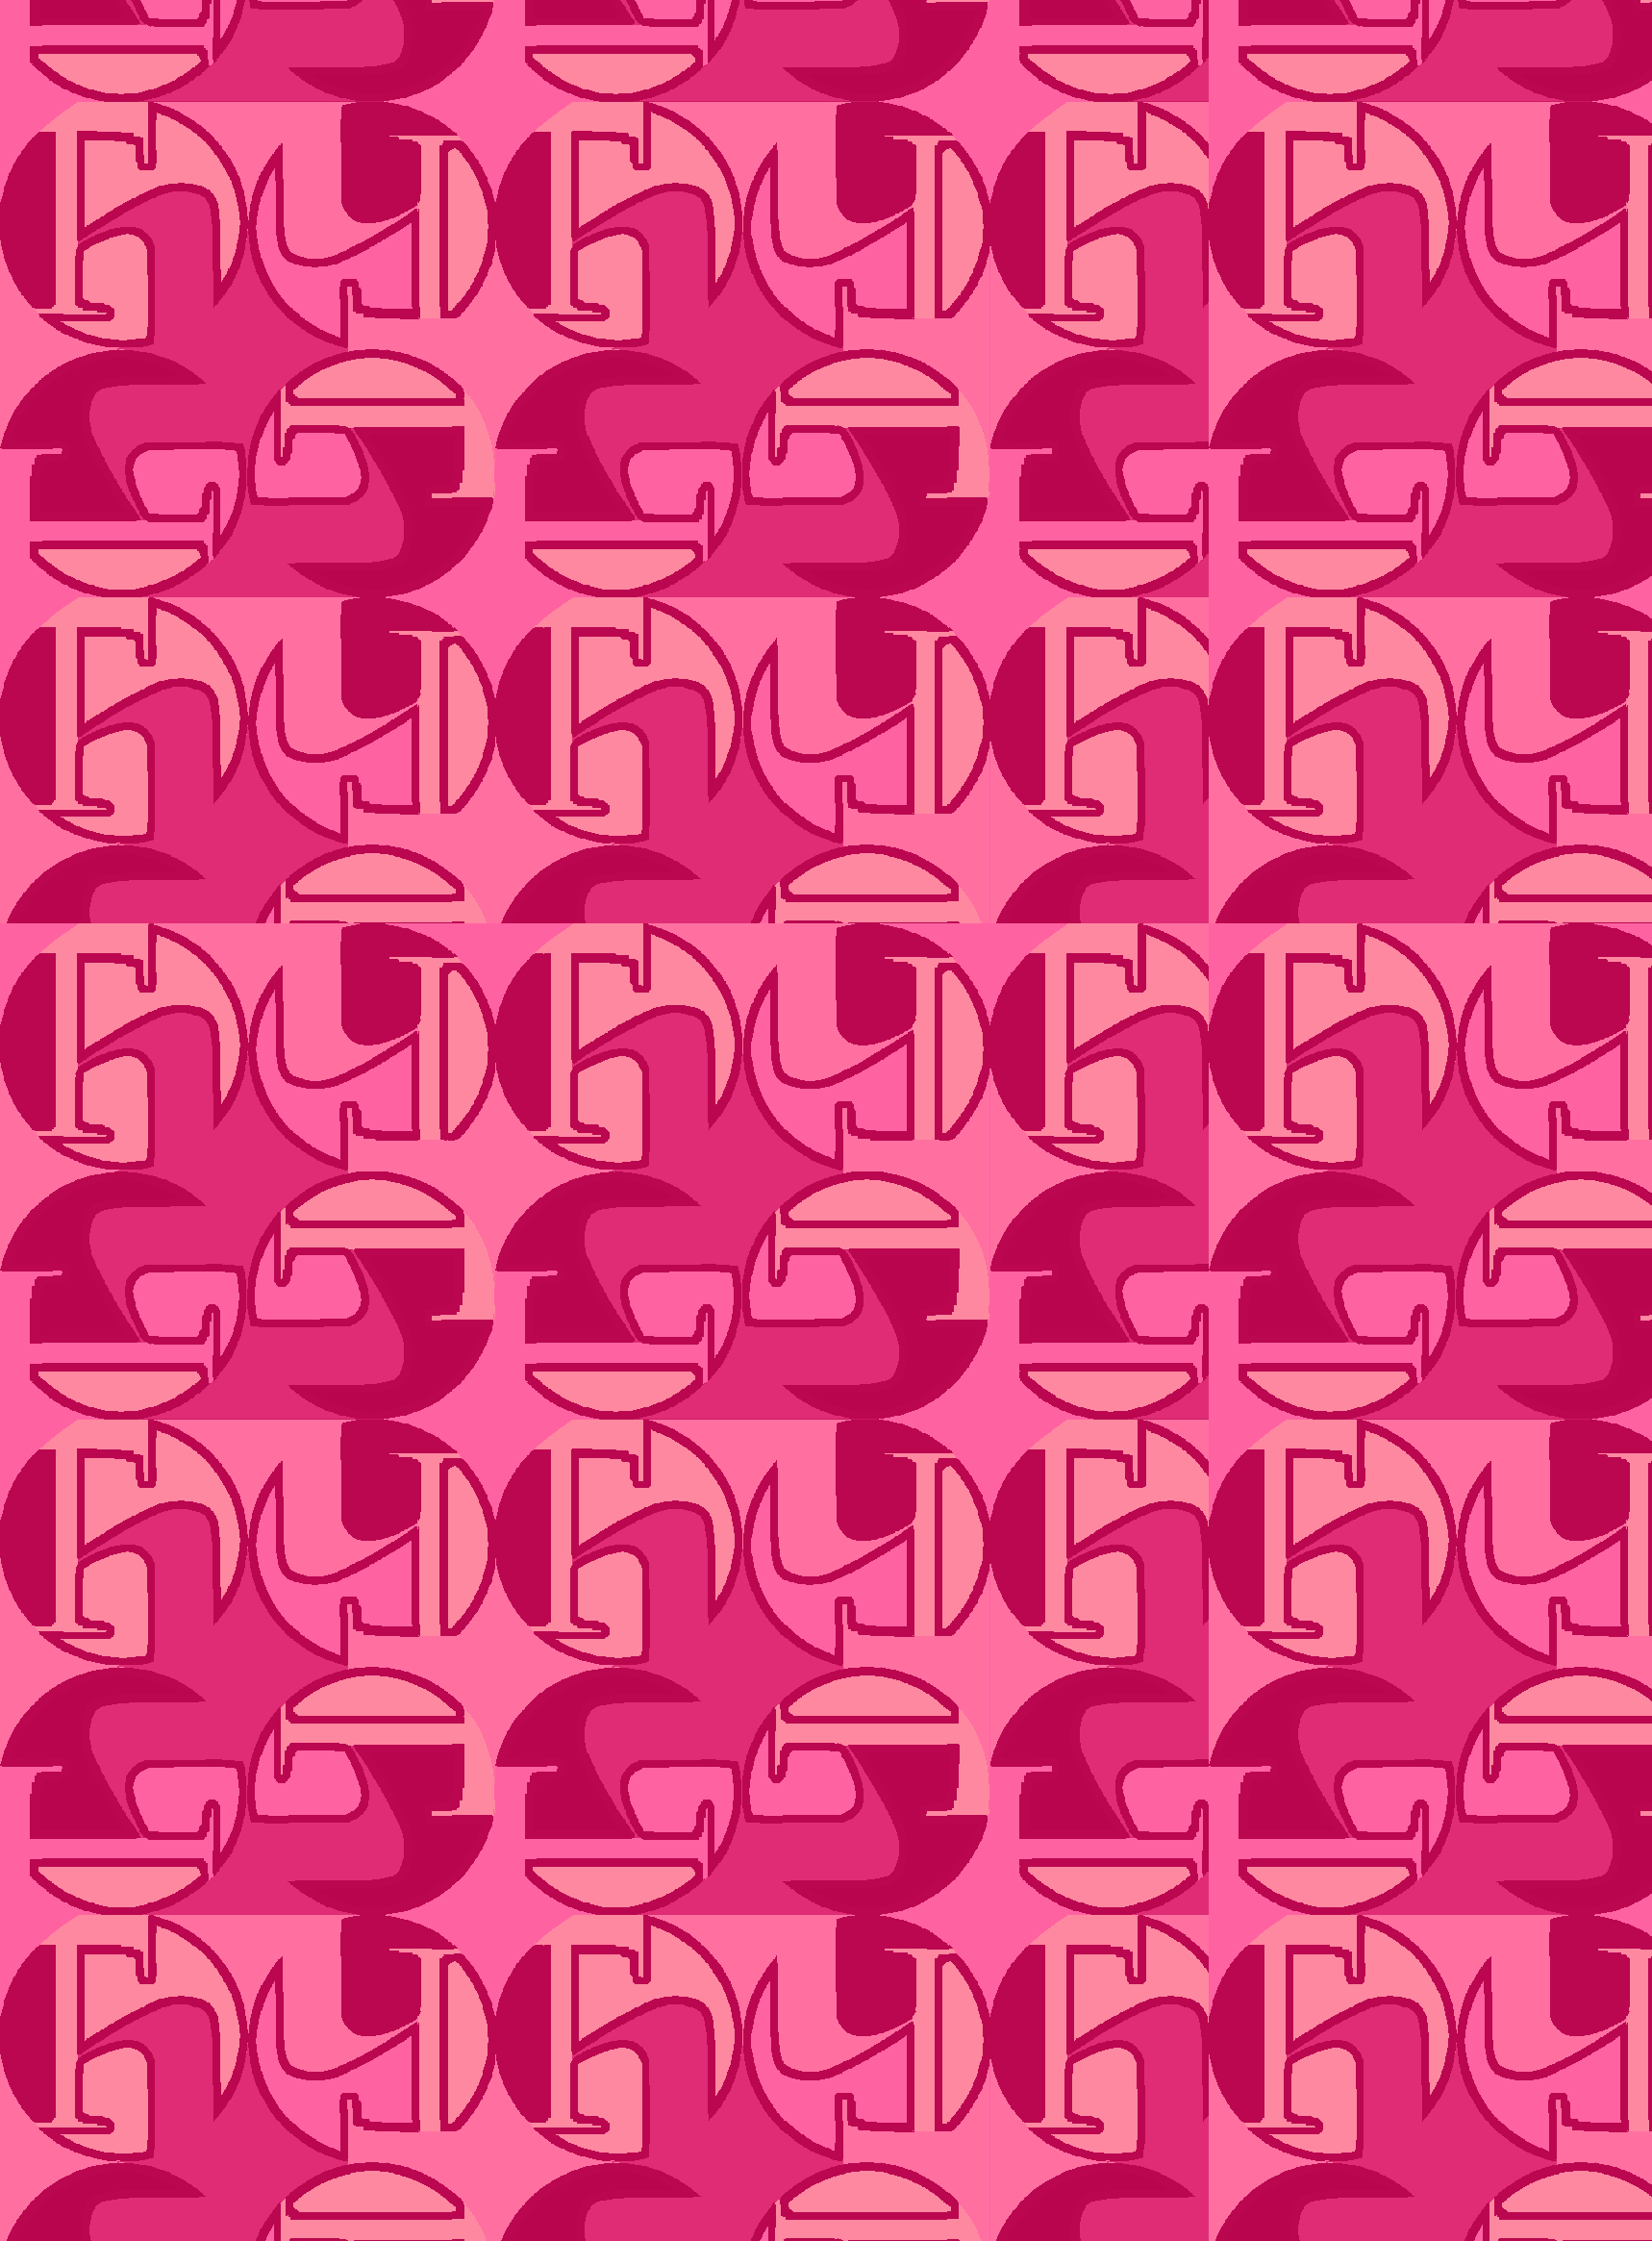 10. IconPrintPink.png